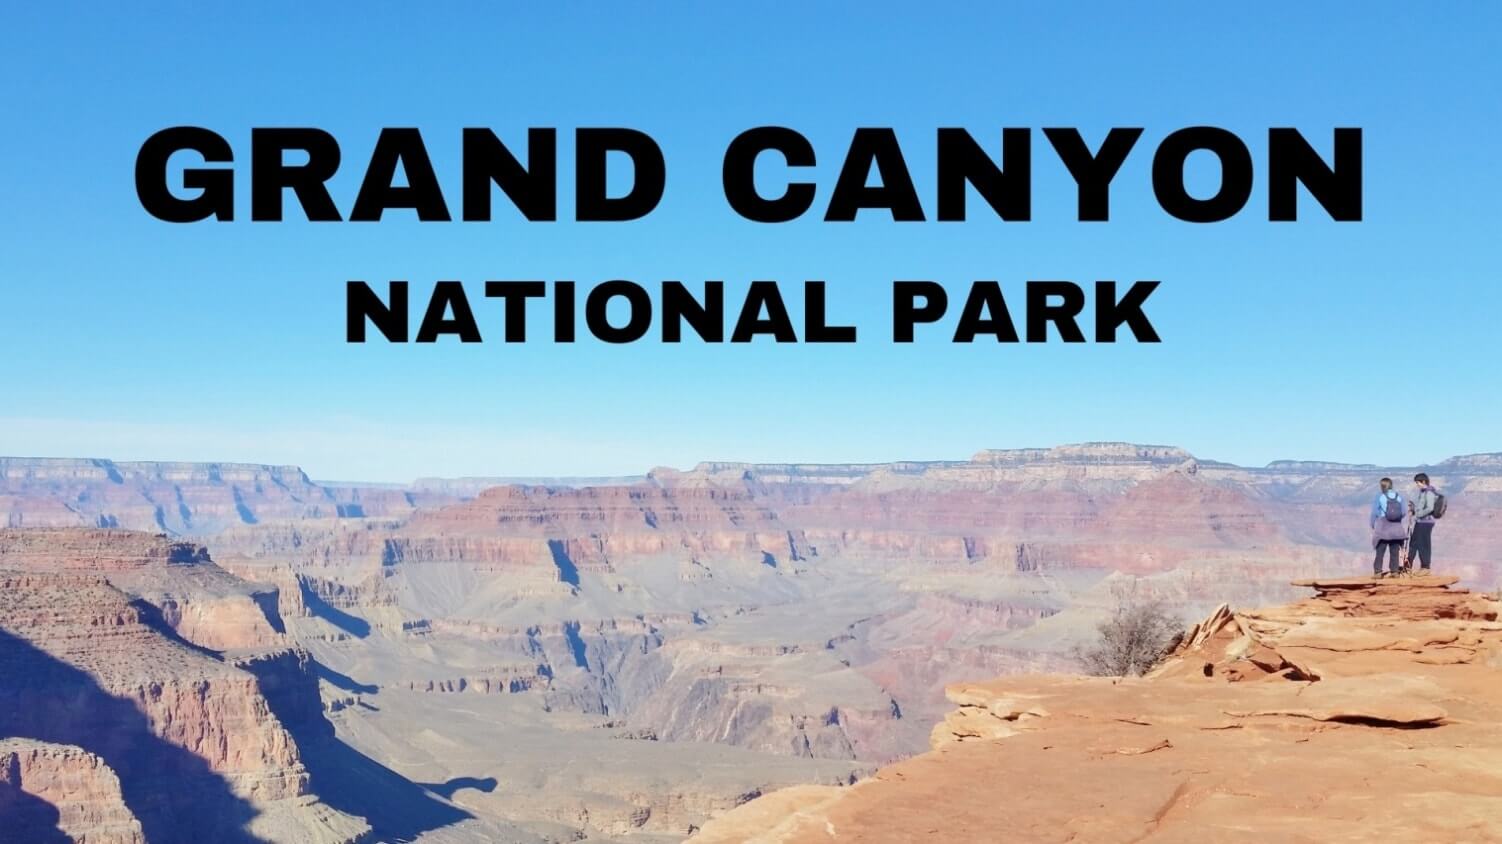 GRAND CANYON NATIONAL PARK OUTDOOR TRAVEL BLOG: Independent traveler's guide to Grand Canyon National Park